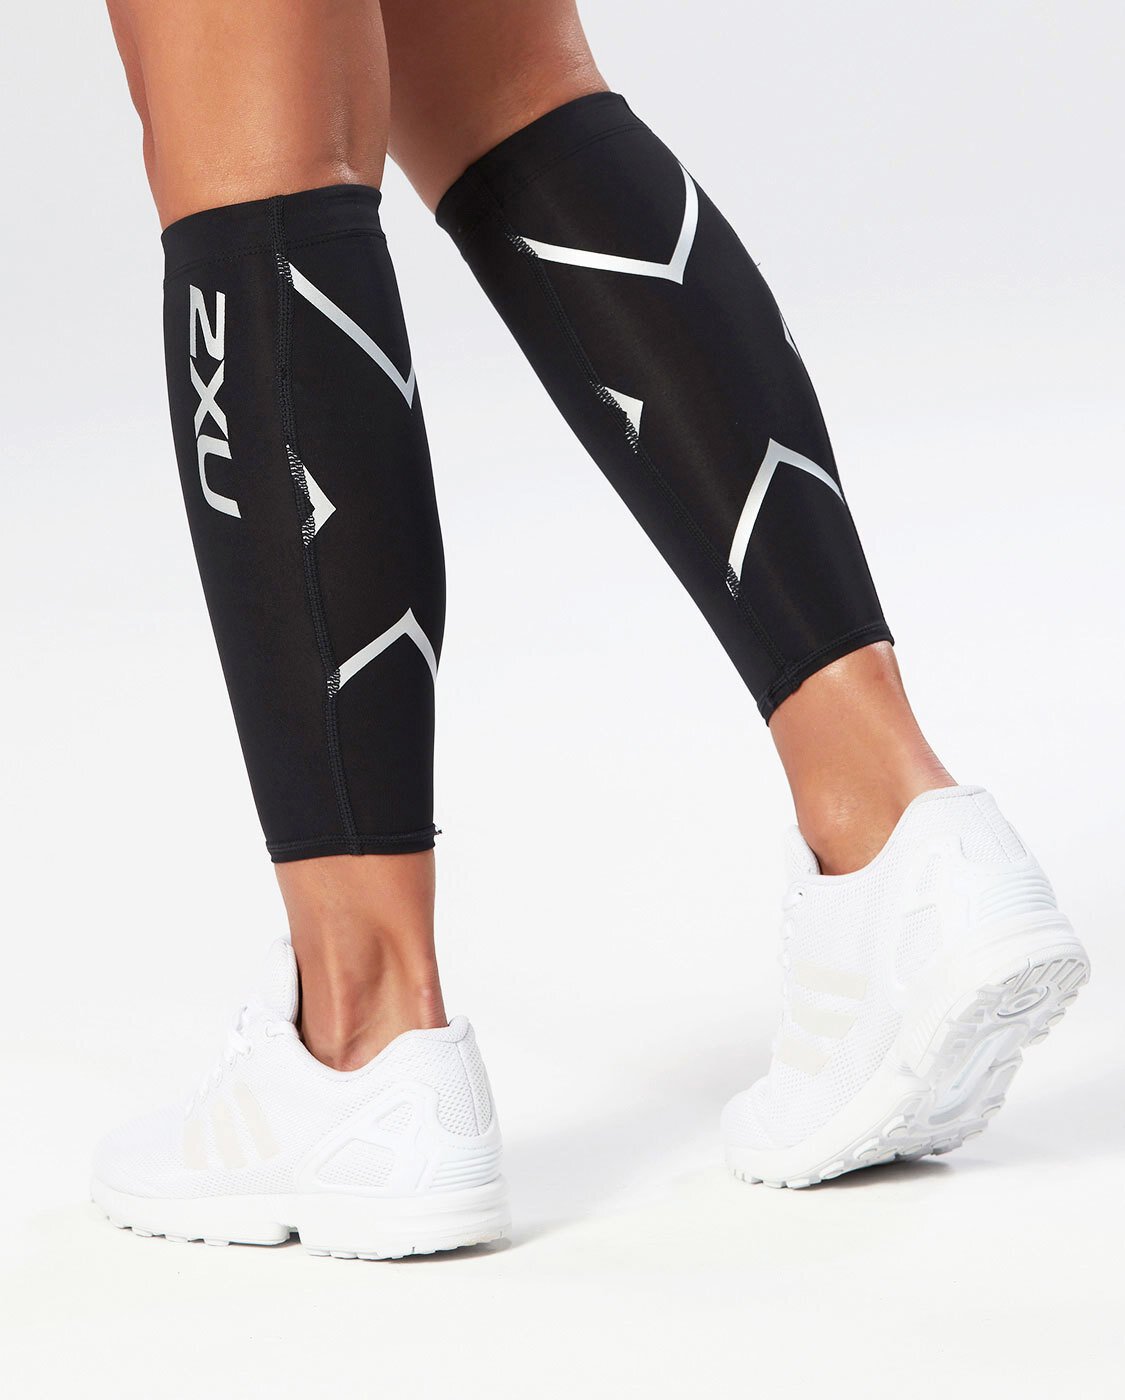 Spænding makeup et eller andet sted 2XU Compression Calf Guards - Pair - Buy Online - Ph: 1800-370-766 -  AfterPay & ZipPay Available!